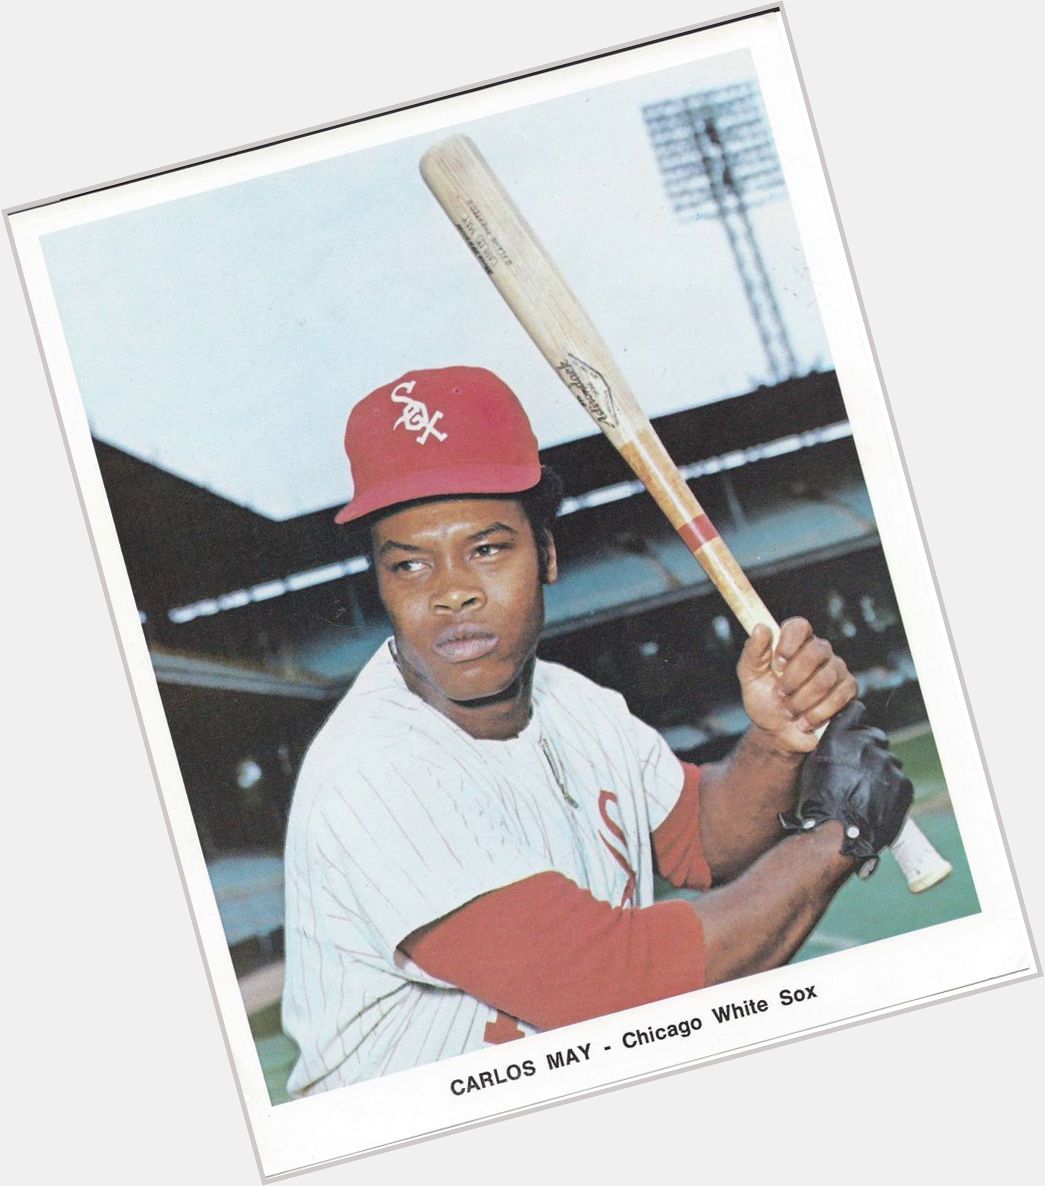 Happy Birthday to Carlos May. The only player to wear his Birth month & day on his jersey  